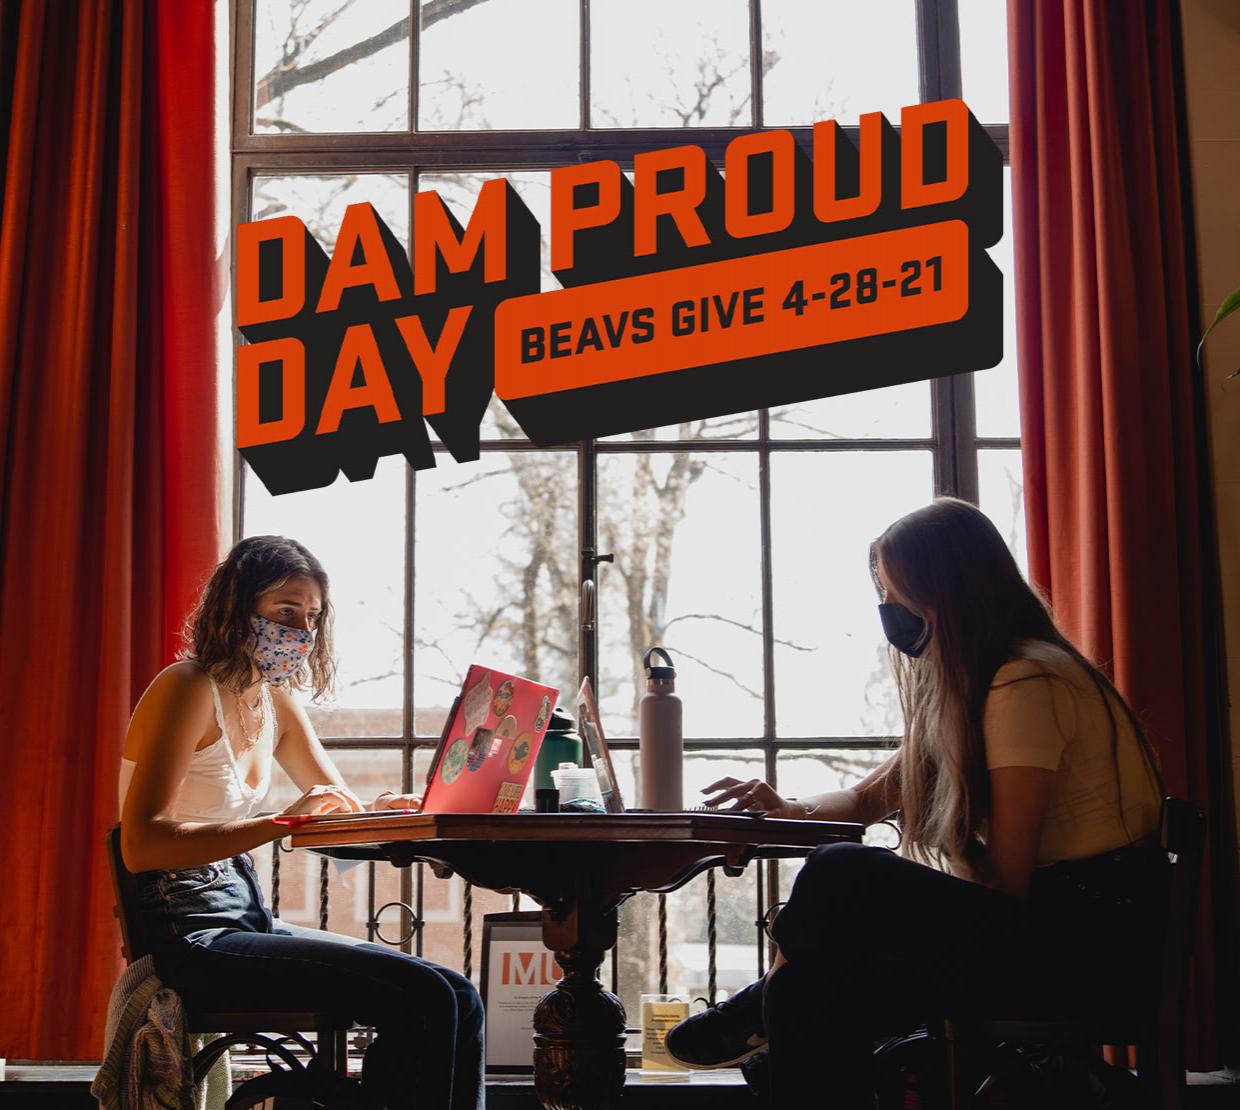 Dam Proud Day logo above an image of two students studying in the Memorial Union lounge.